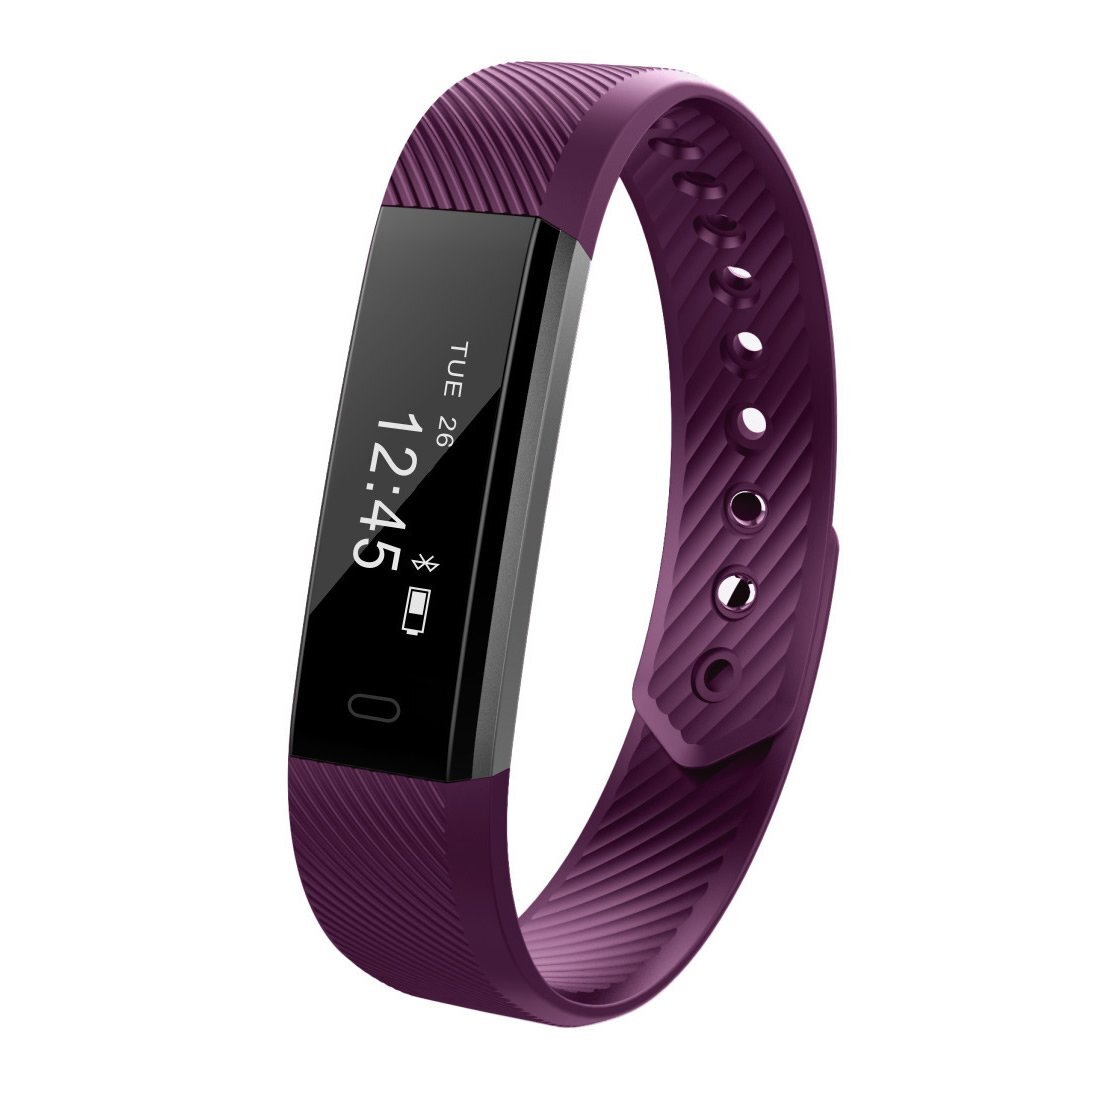 Color: PURPLE - SmartFit Slim Activity Tracker And Monitor Smart Watch ...